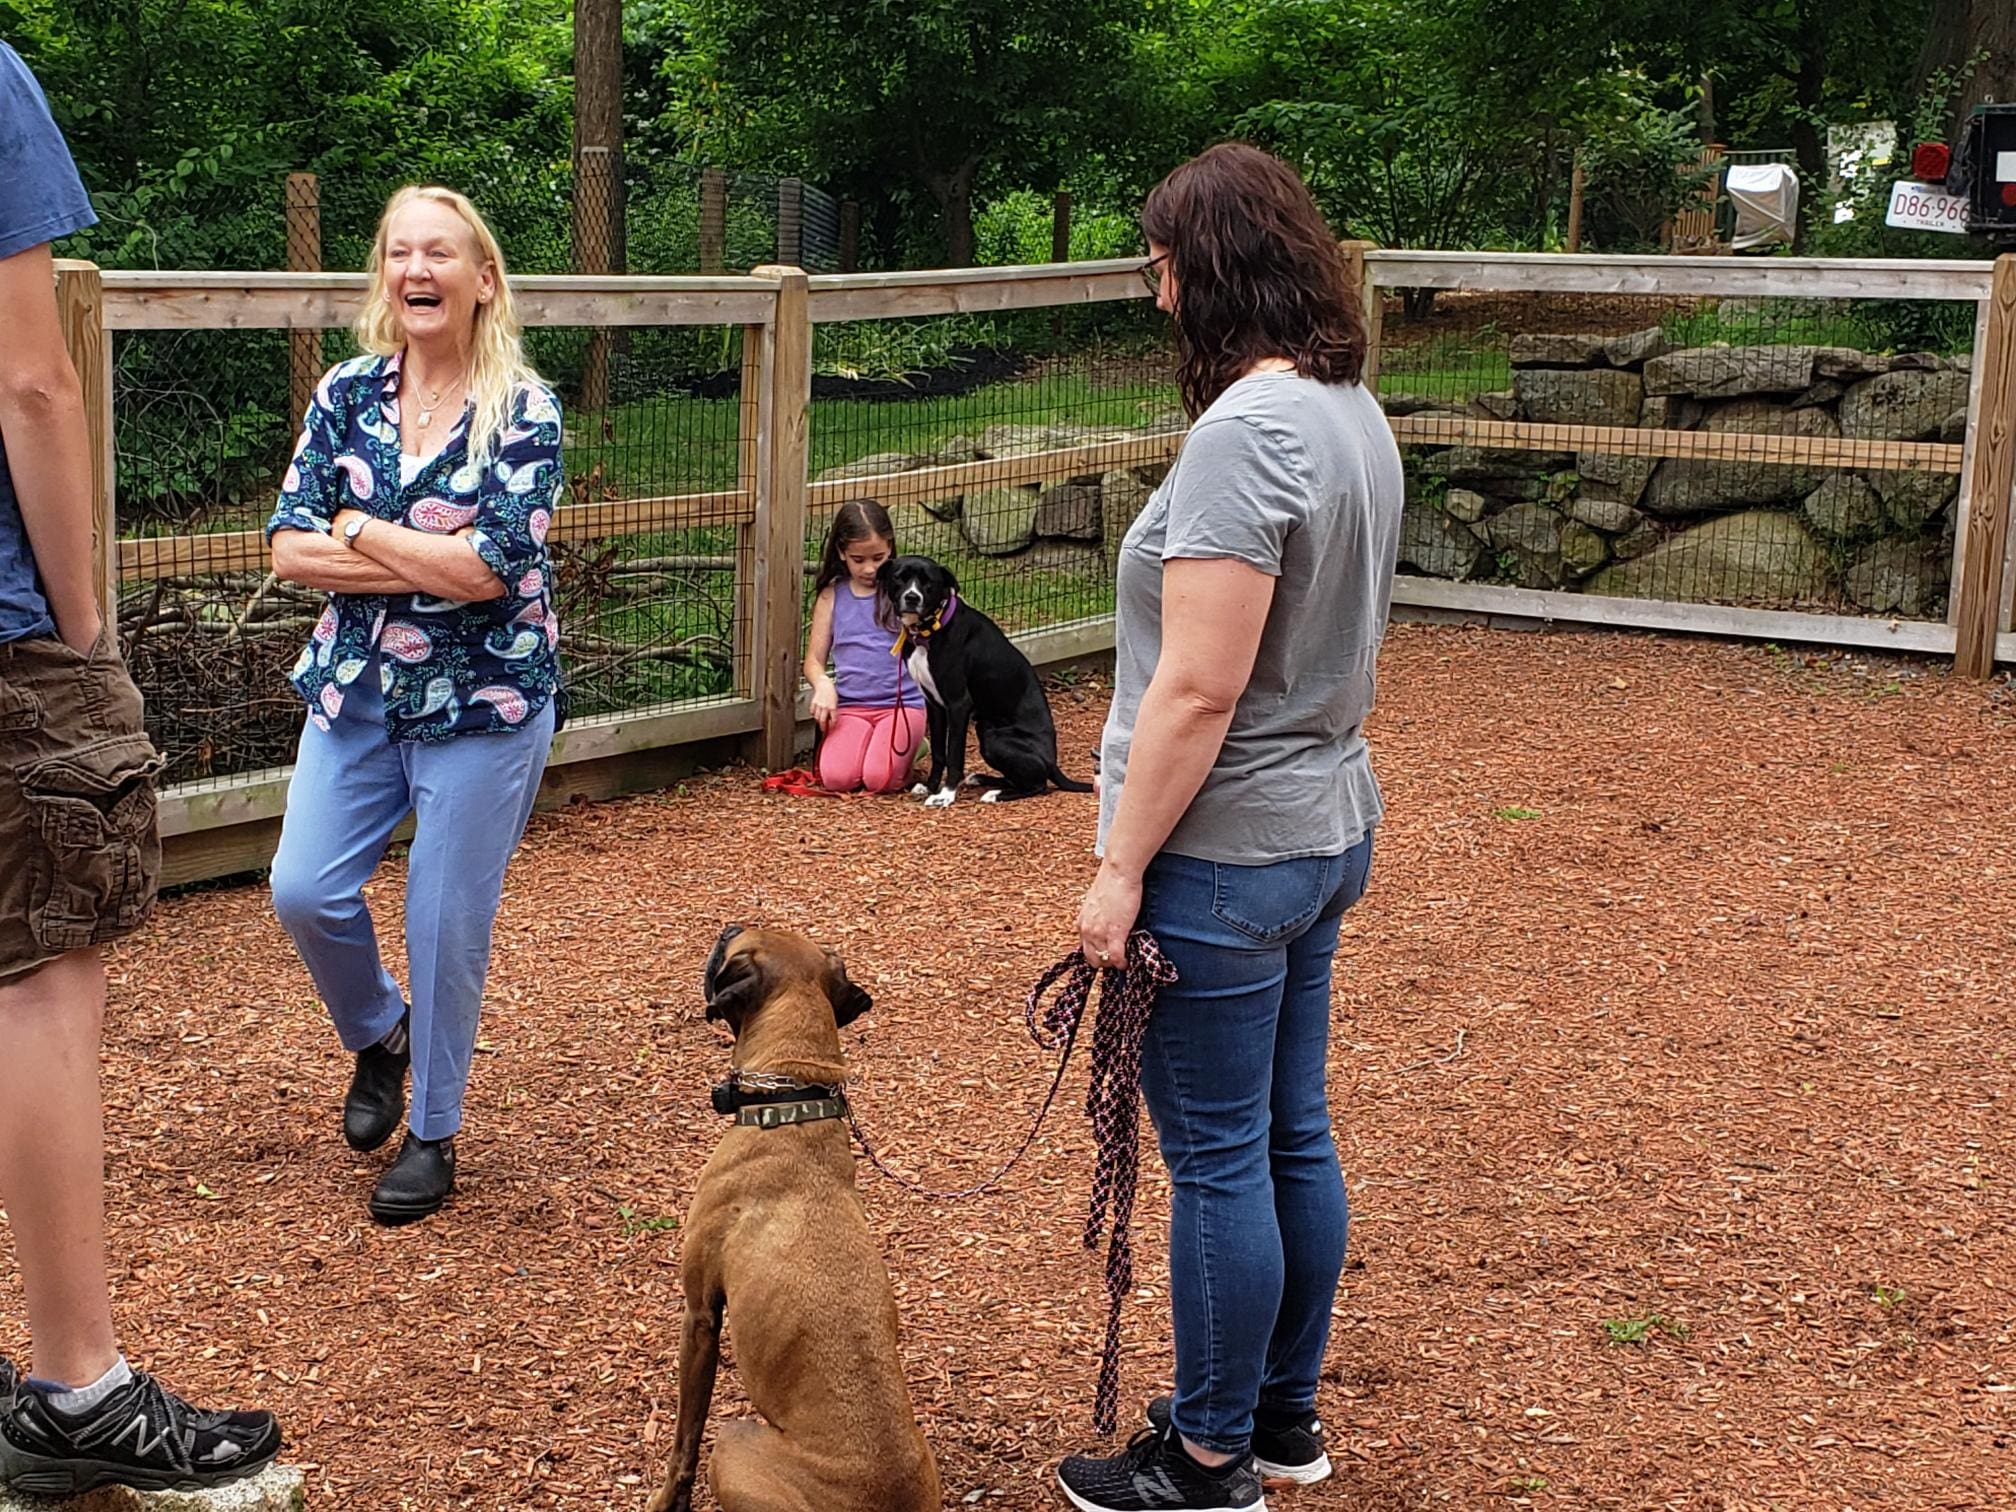 blonde woman smiling while training family with their dog in a fenced area. little girl sits with black dog against fence.